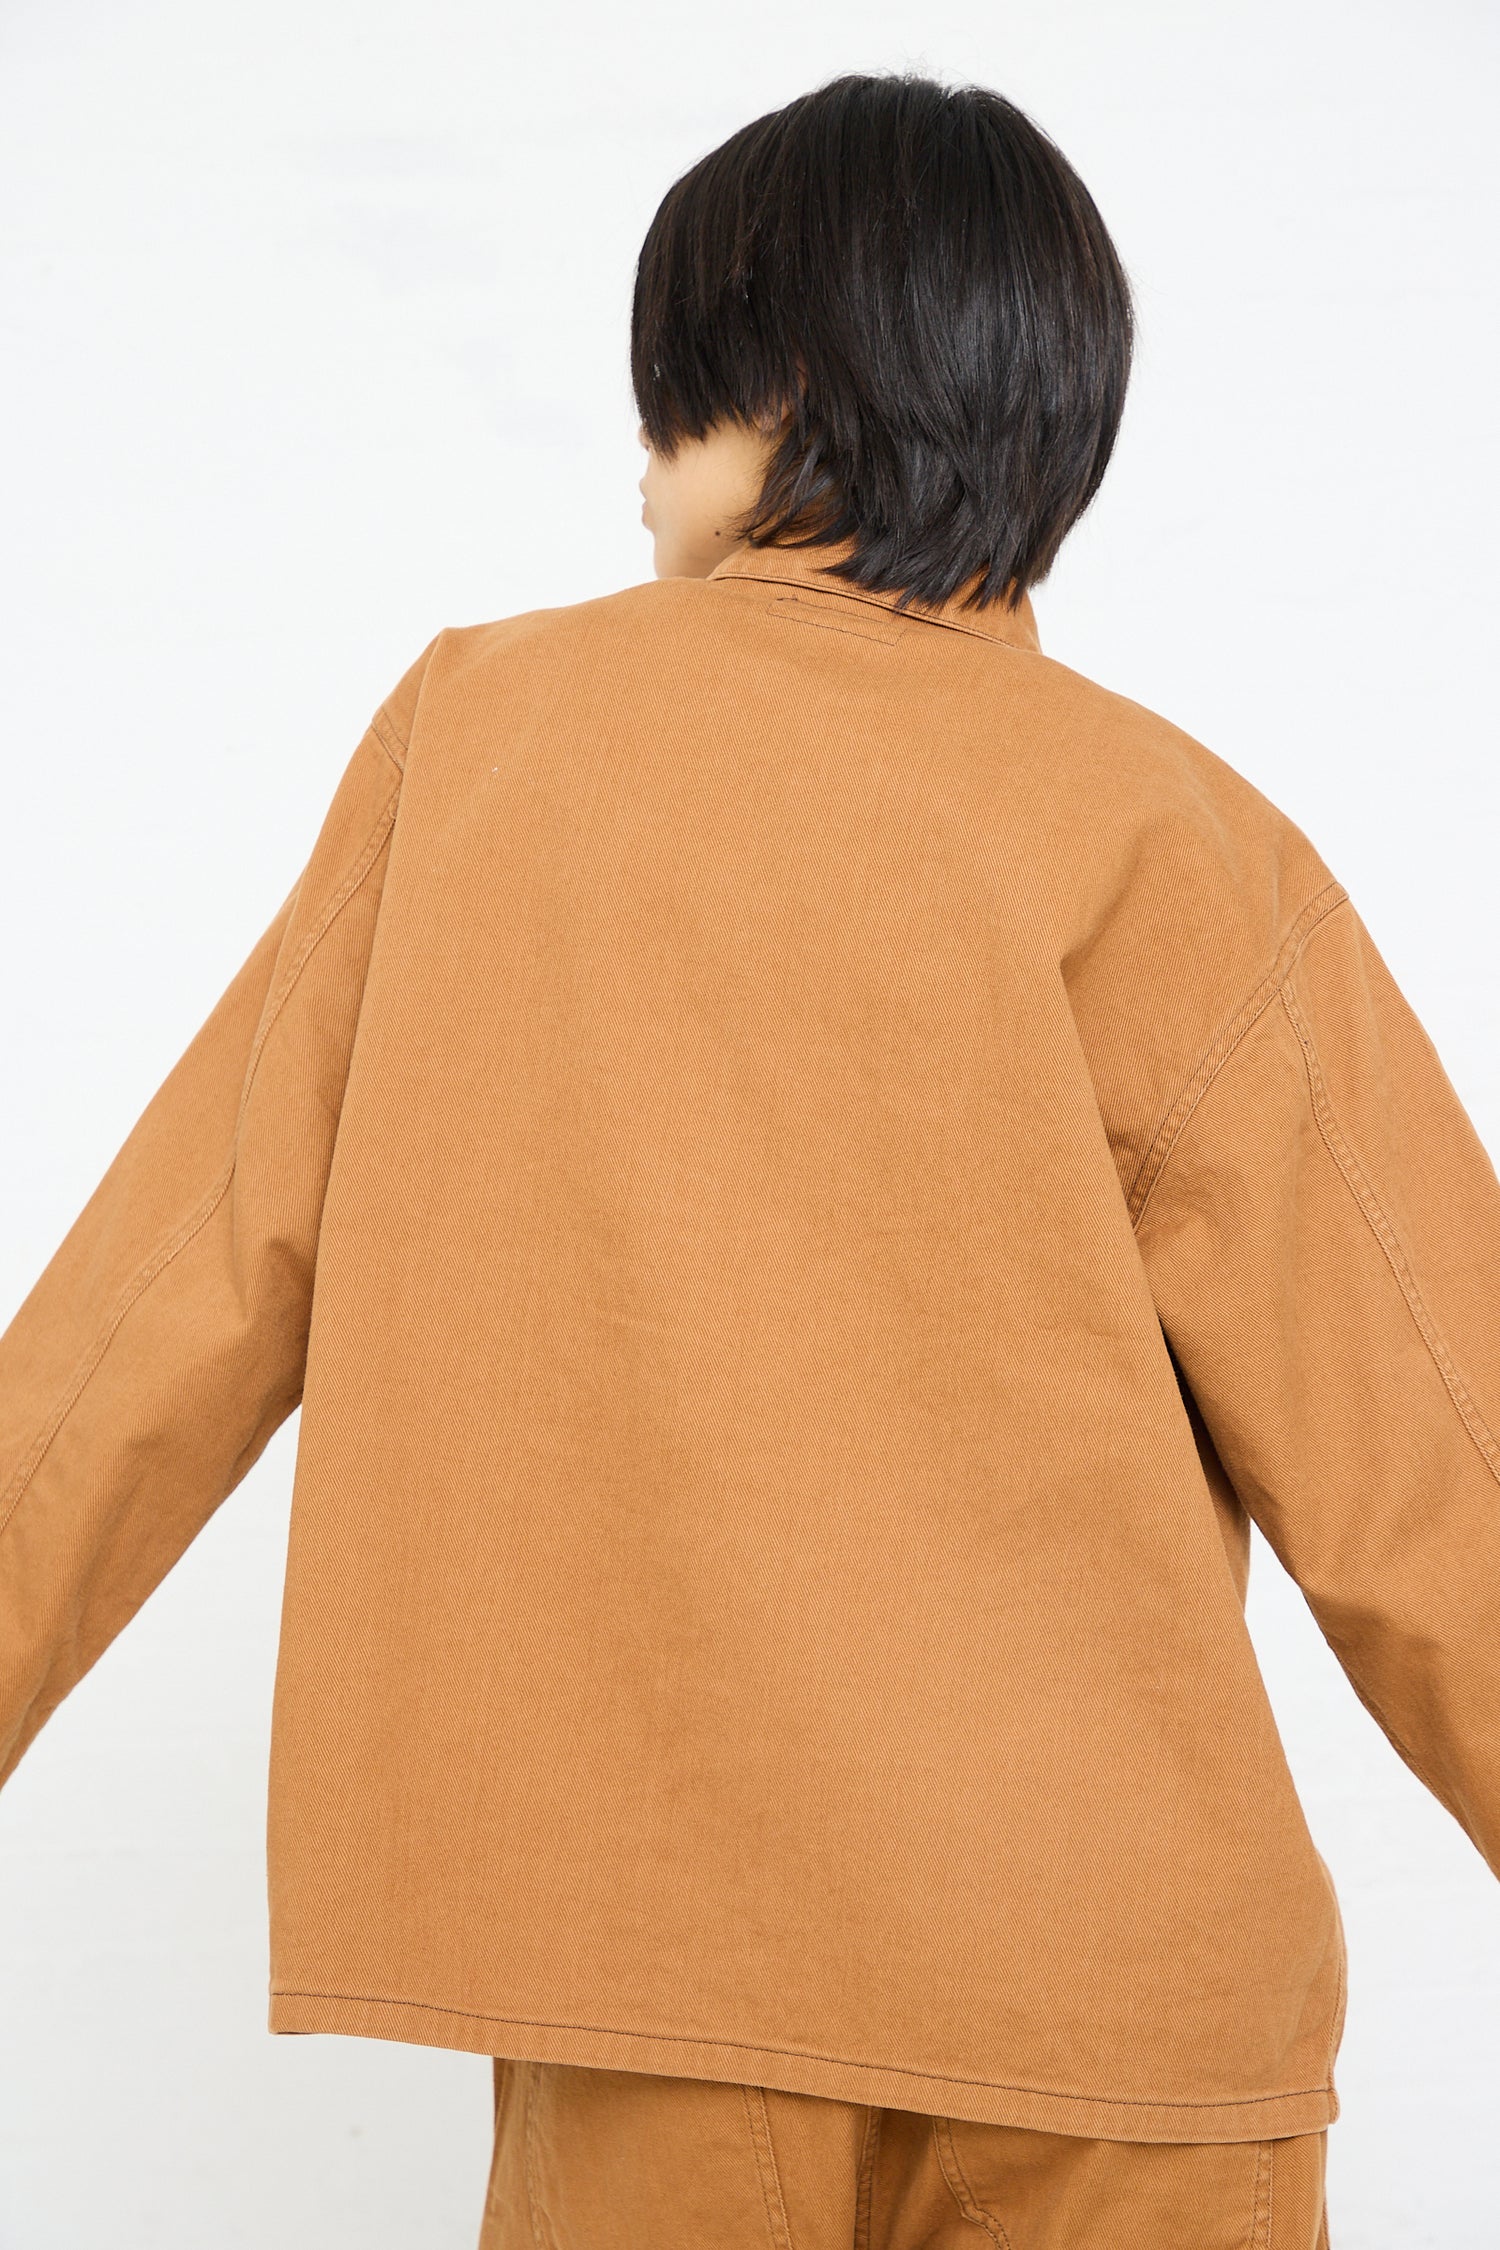 Person wearing a Chimala Unisex Classic Drill US Army Work Jacket in Camel from behind against a white background.